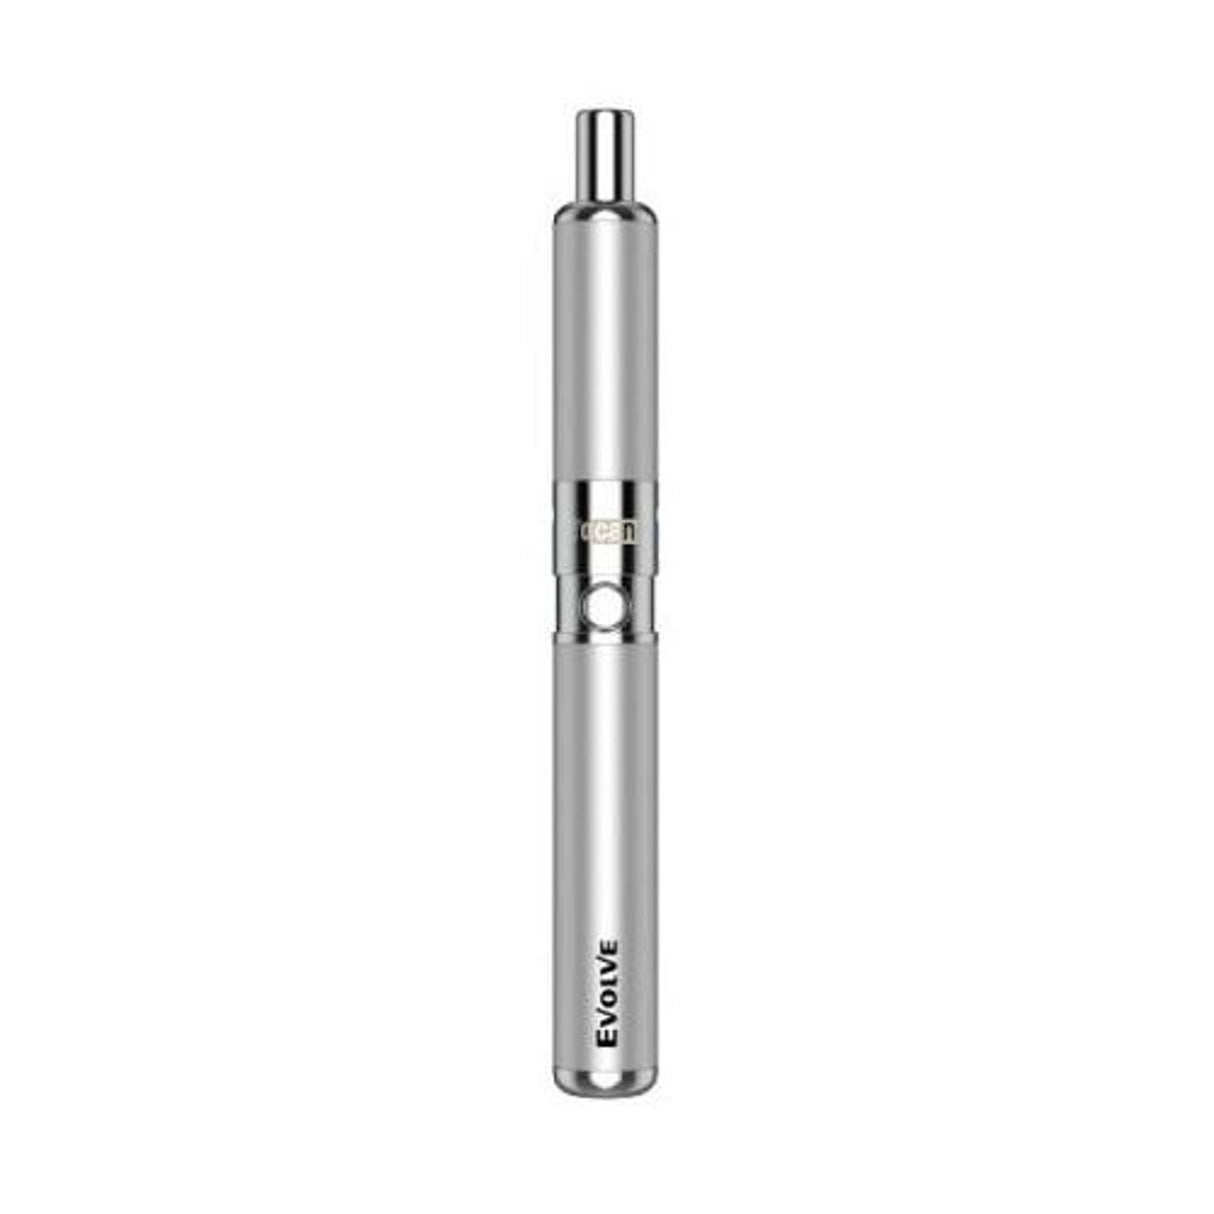 Yocan Evolve-D Dry Herb Vaporizer in Silver, 650mAh Battery, Portable Design, Front View